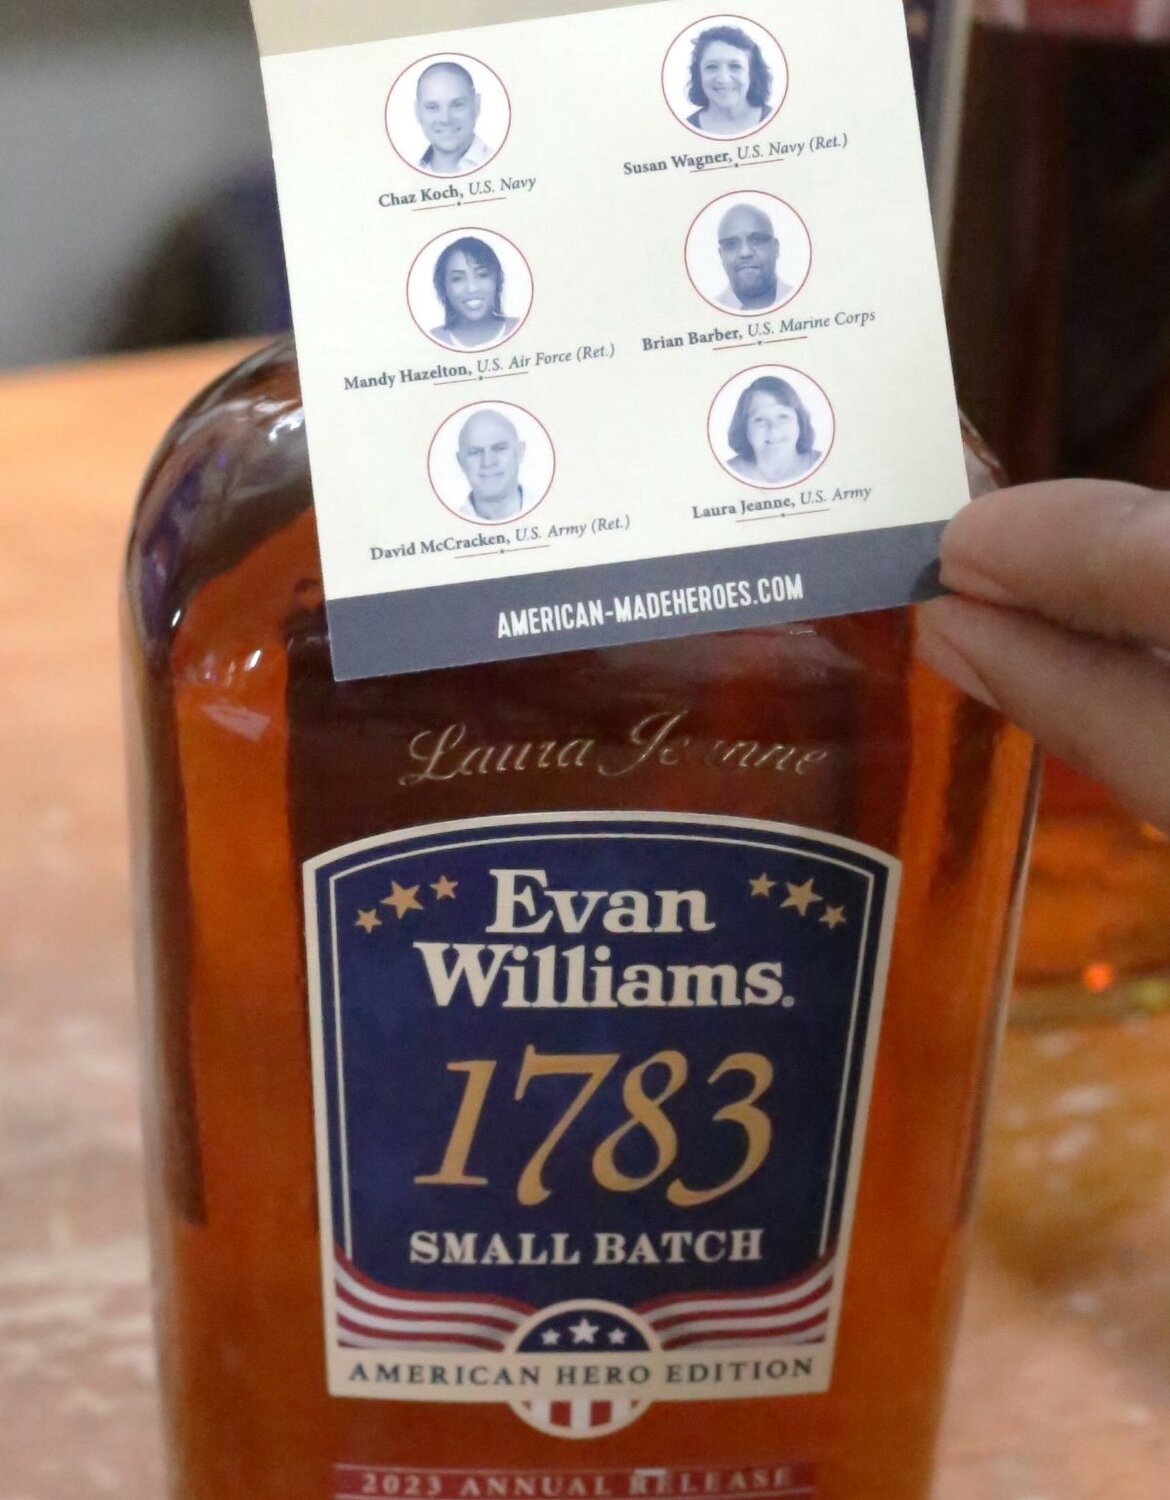 One of the special bourbons distilled by Evan Williams recognizing Jeanne and her work with Adapt-Able.